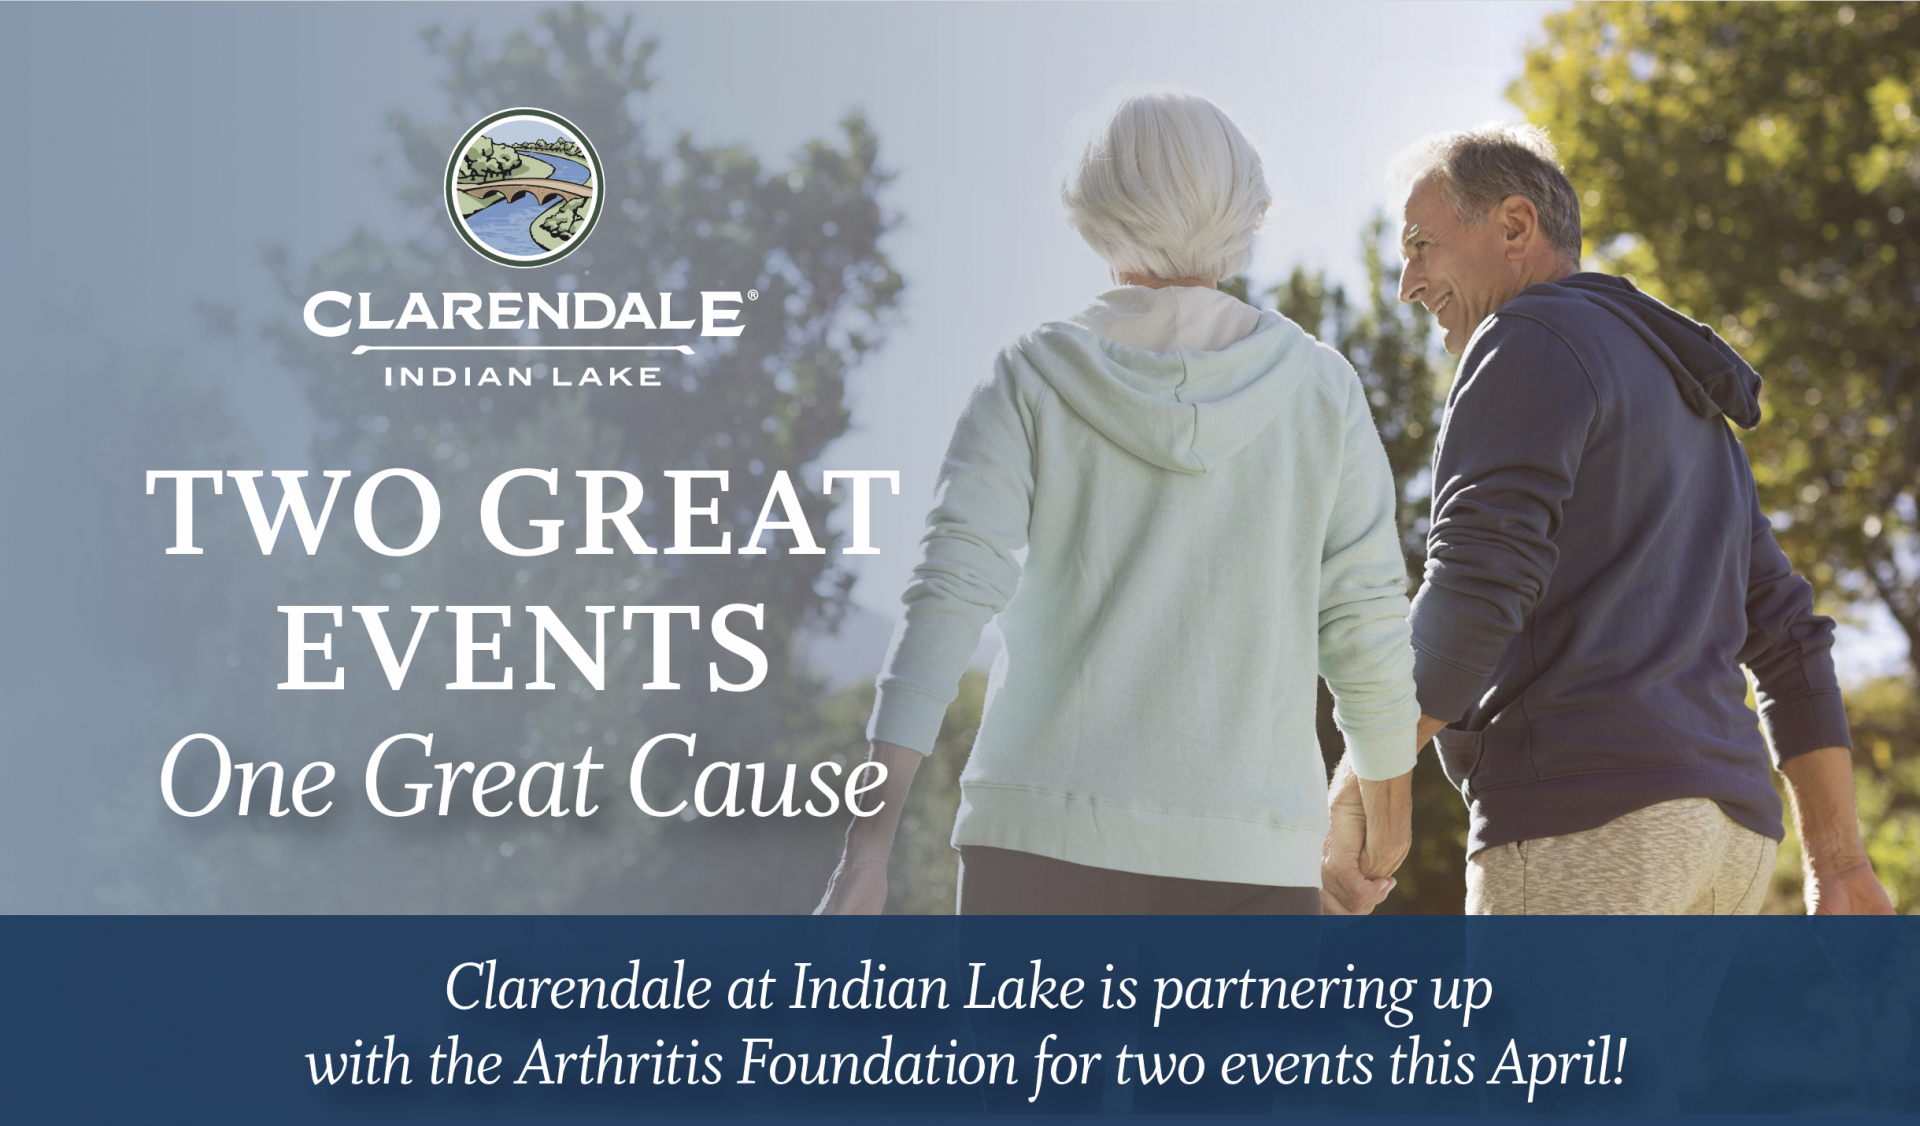 Event flier for Clarendale at Indian Lake Partnering with Arthritis Foundation